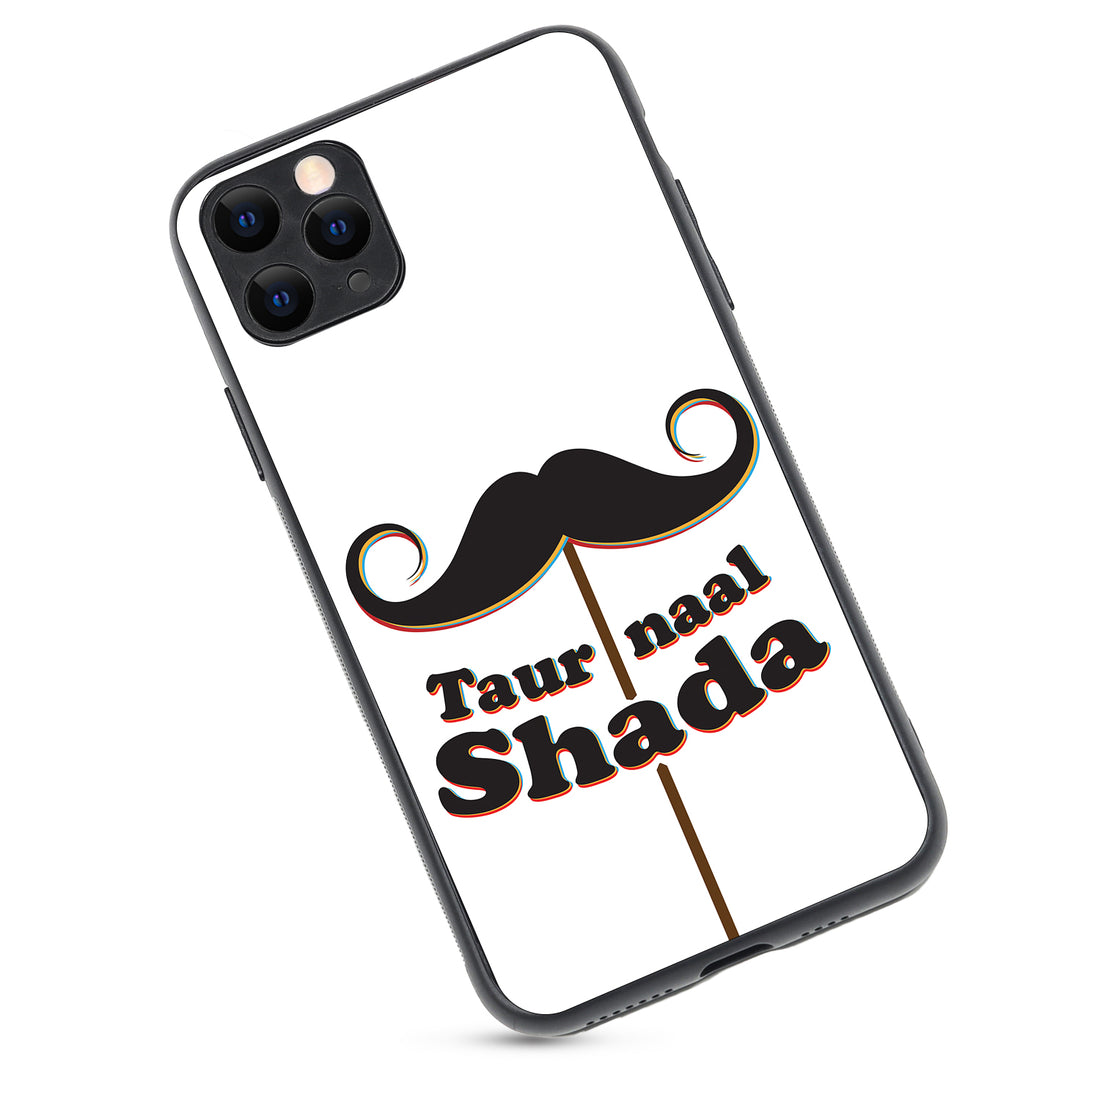 Taur Naal Shada Motivational Quotes iPhone 11 Pro Max Case